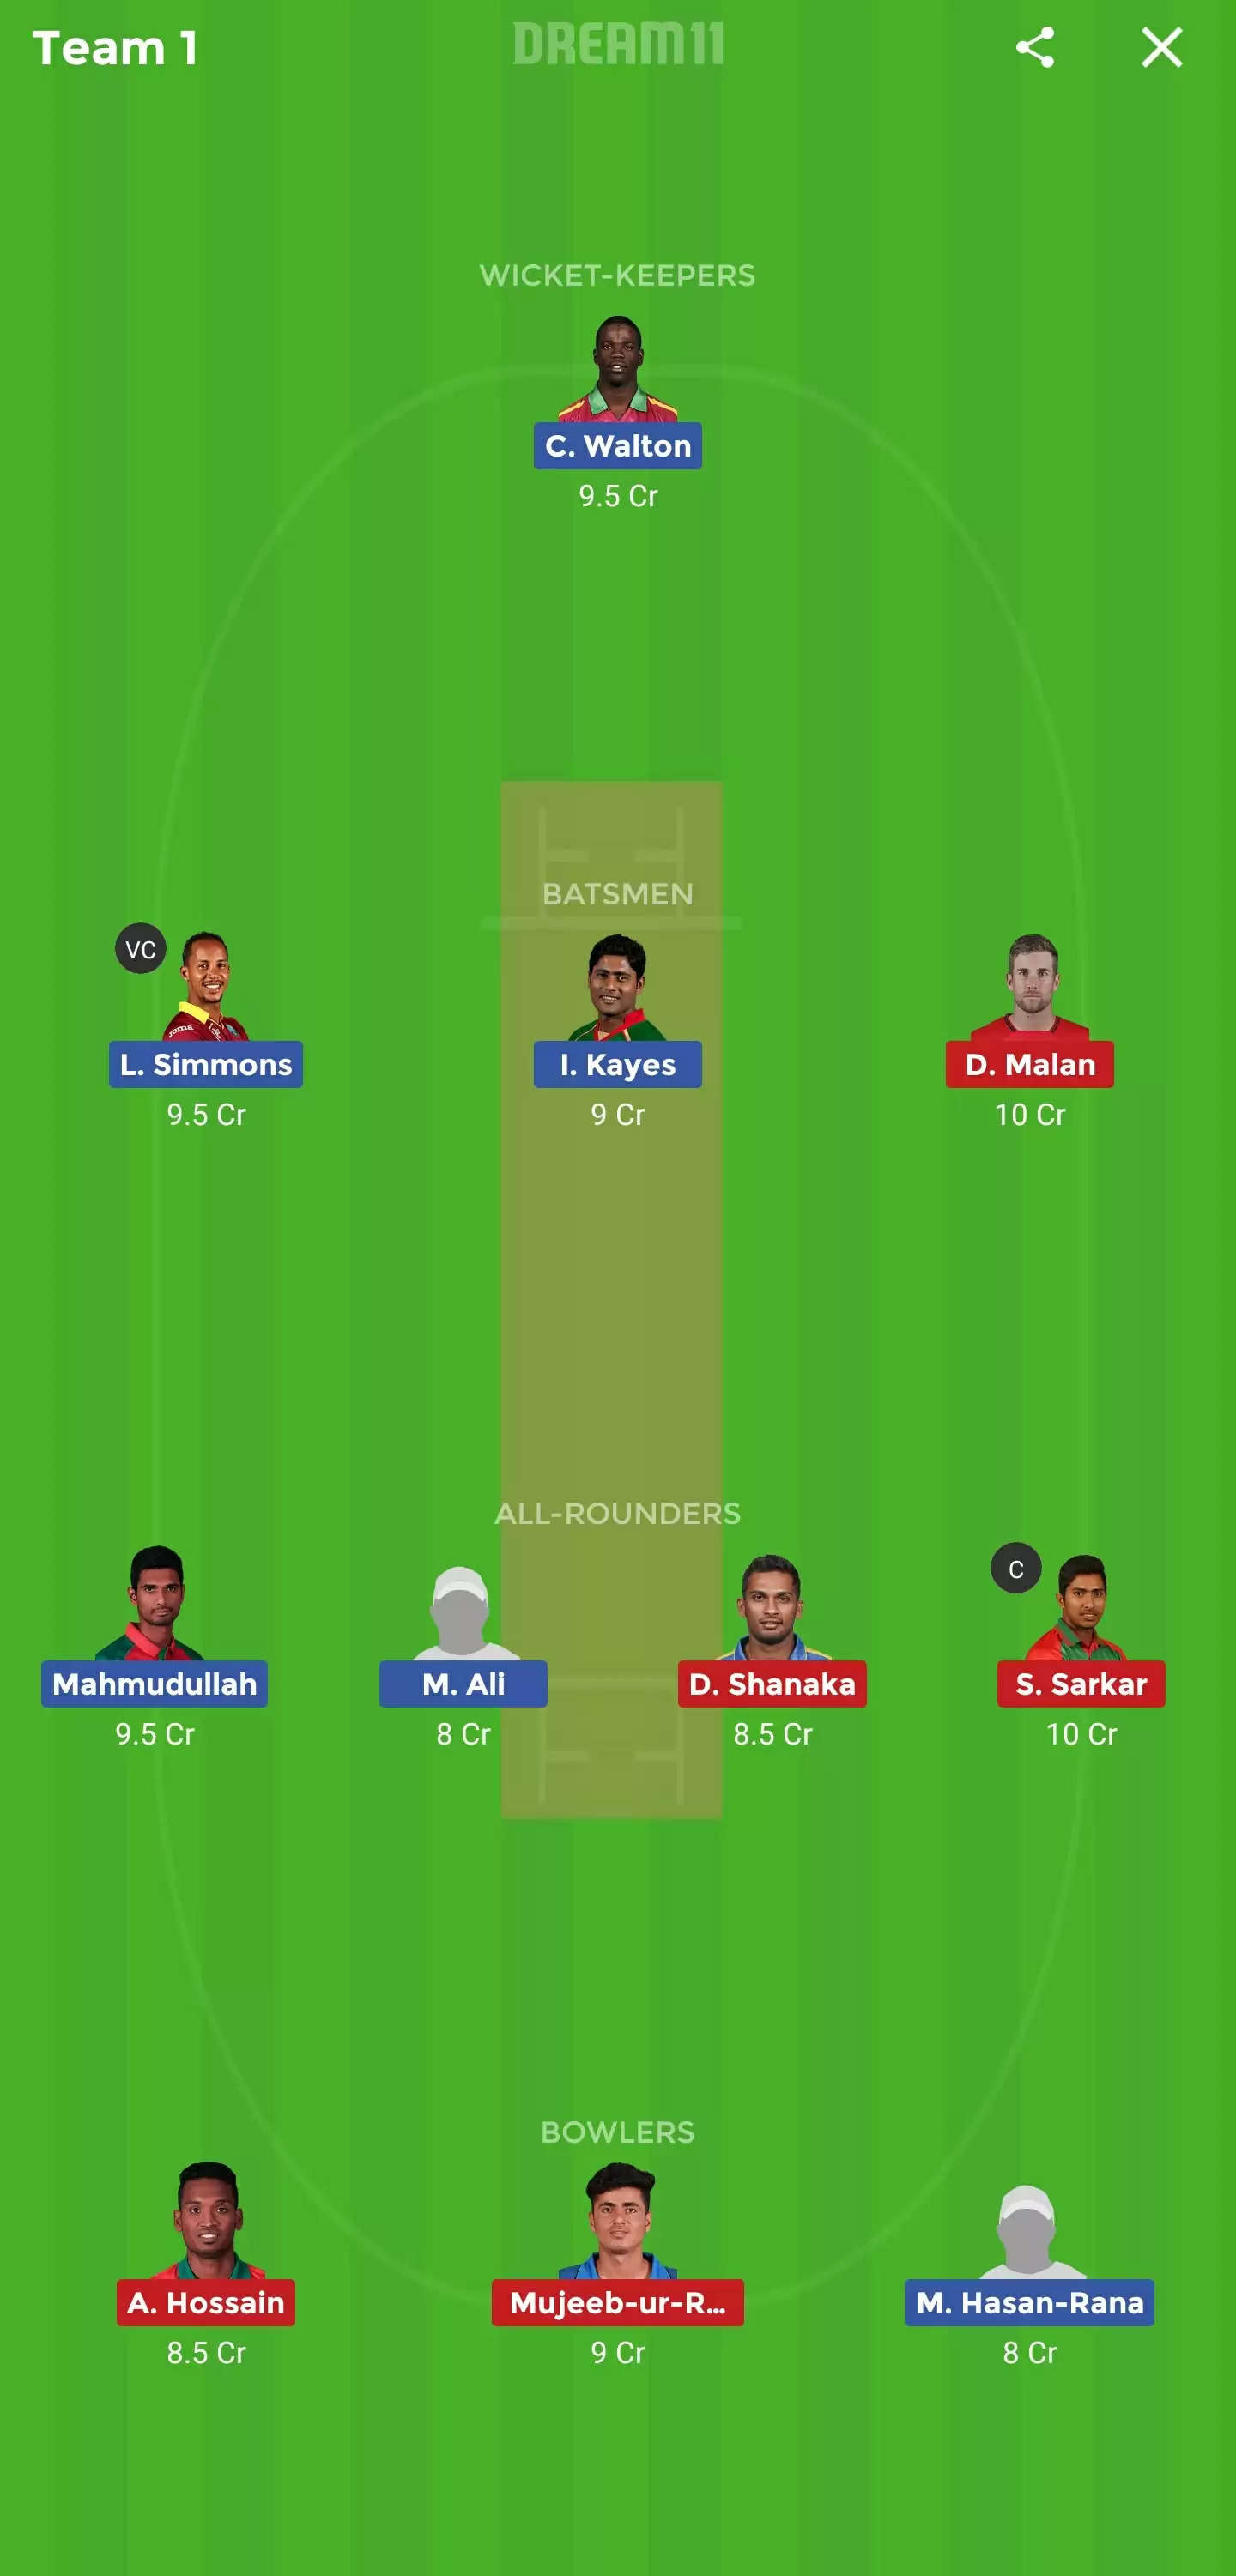 CC vs CW Dream11 Fantasy Cricket Prediction, Preview, Tips, Playing XI, Team, Pitch Report and Weather Conditions | BPL 2019/20